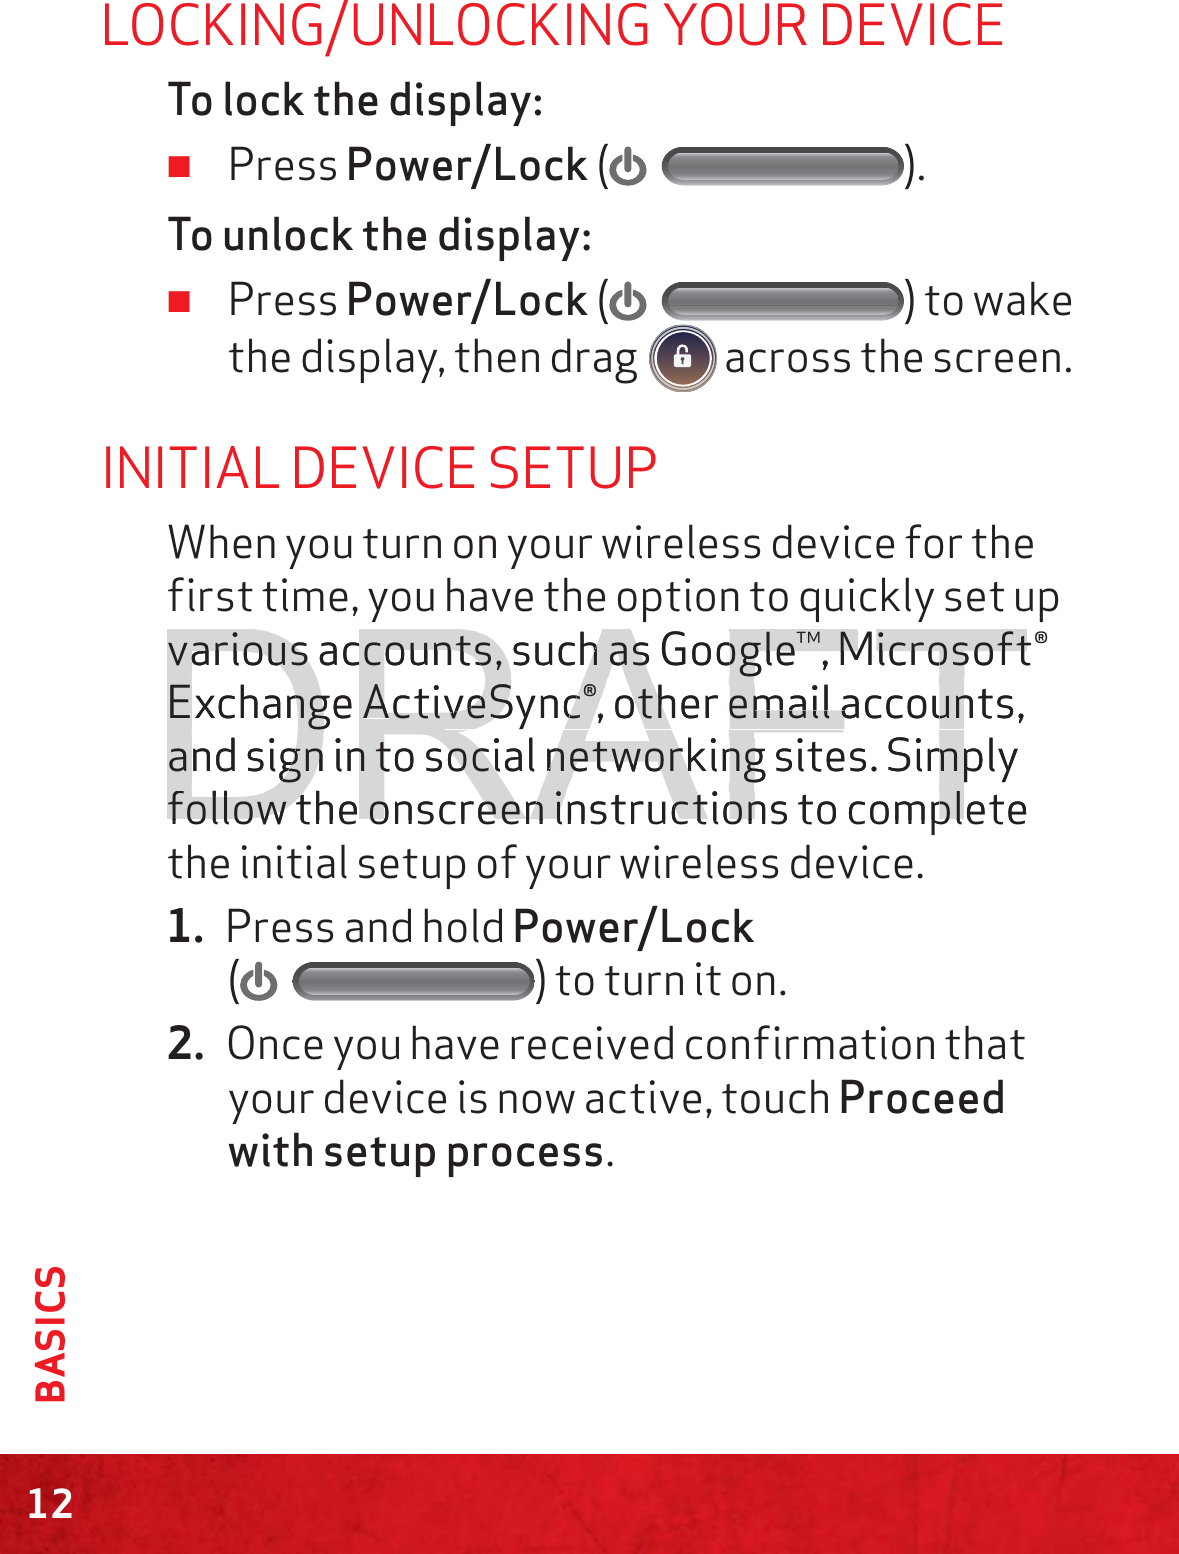 12BASICSLOCKING/UNLOCKING YOUR DEVICETo lock the display: ≠Press Power/Lock ().To unlock the display: ≠Press Power/Lock () to wake the display, then drag   across the screen.INITIAL DEVICE SETUPWhen you turn on your wireless device for the first time, you have the option to quickly set up various accounts, such as Google™, Microsoft® Exchange ActiveSync®, other email accounts, and sign in to social networking sites. Simply follow the onscreen instructions to complete the initial setup of your wireless device.1. Press and hold Power/Lock  () to turn it on.2. Once you have received confirmation that your device is now active, touch Proceed with setup process.DRAFTvarious accounts, such as Google™, Microsoftvarious accounts, such as Google™, MicrosoftExchange ExchangAActictiveSync®, other email accounts, veSync®, other email accounand sign in to social networking sites. Simply and sign in to social networking sites. Simpfollow the onscreen instructions to completefollow the onscreen instructions to compl